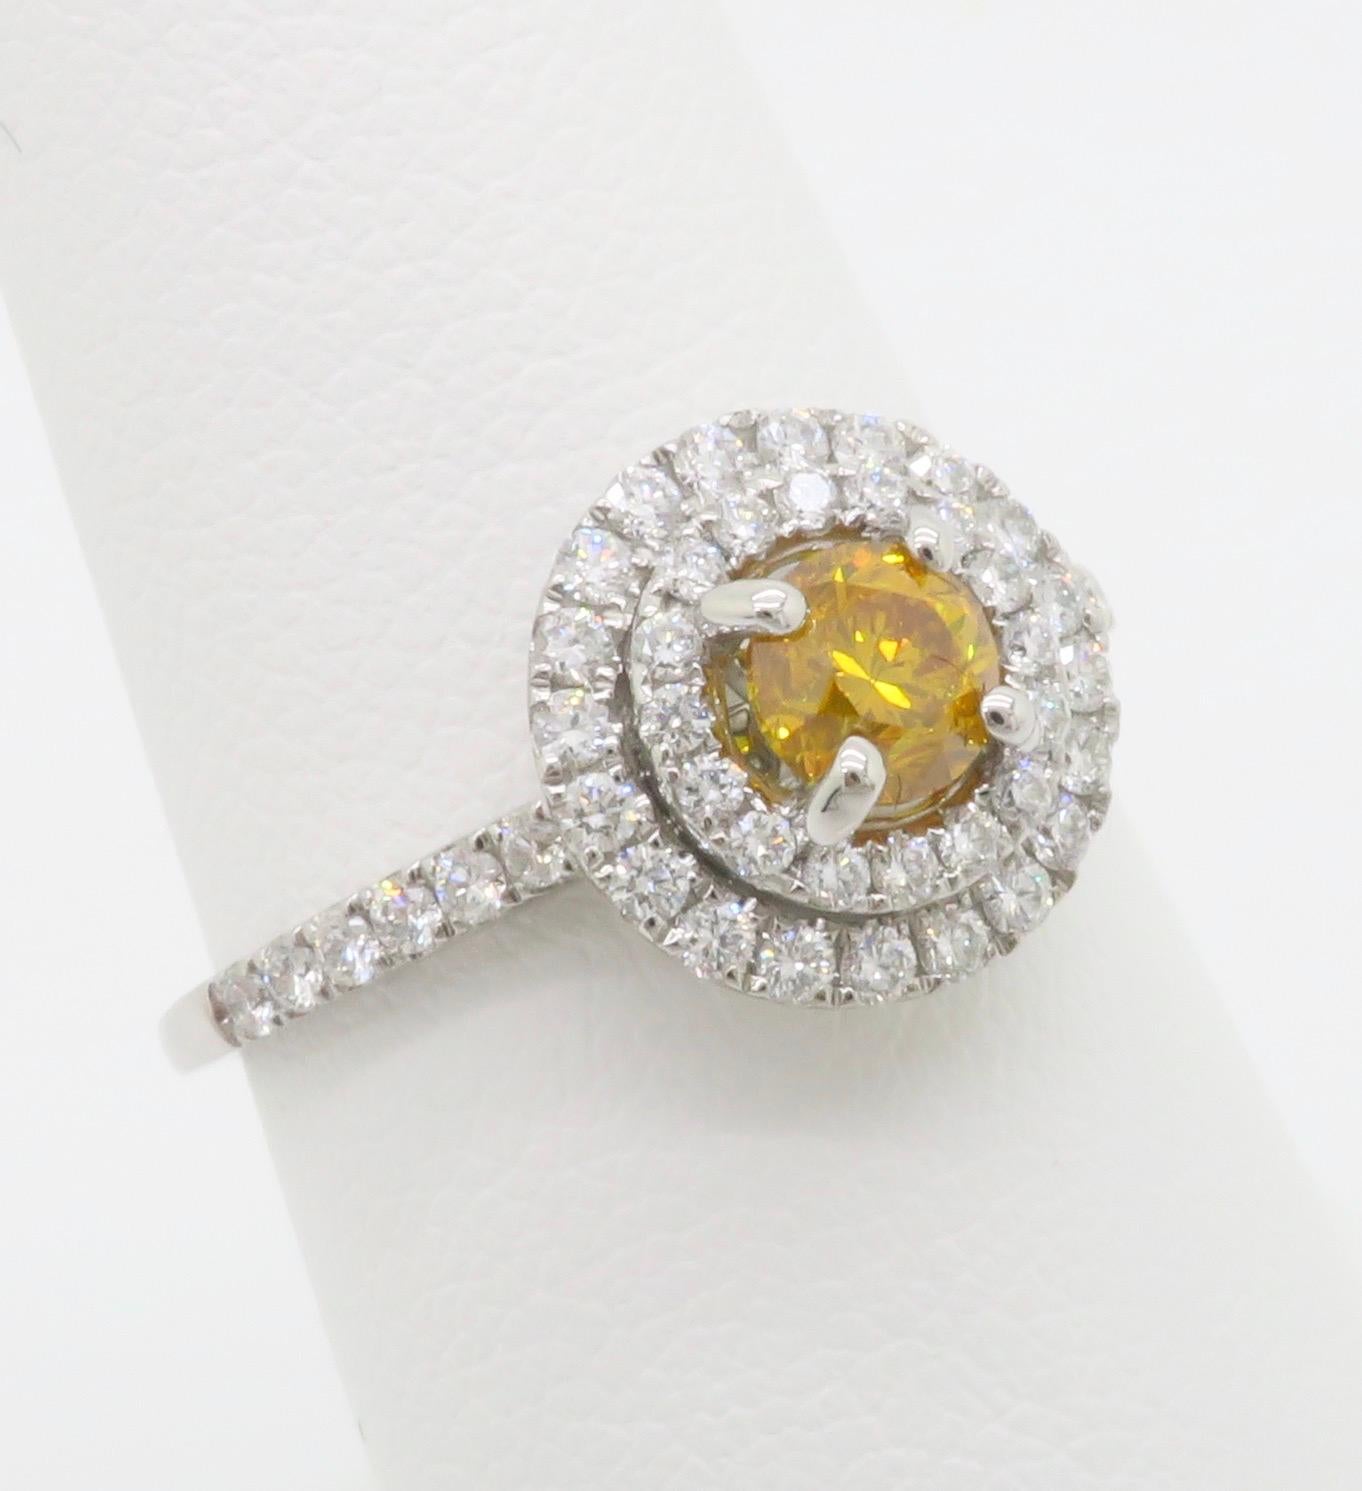 GIA Certified Natural Fancy Vivid Yellow-Orange Double Halo Diamond Ring in 18k  In Excellent Condition For Sale In Webster, NY